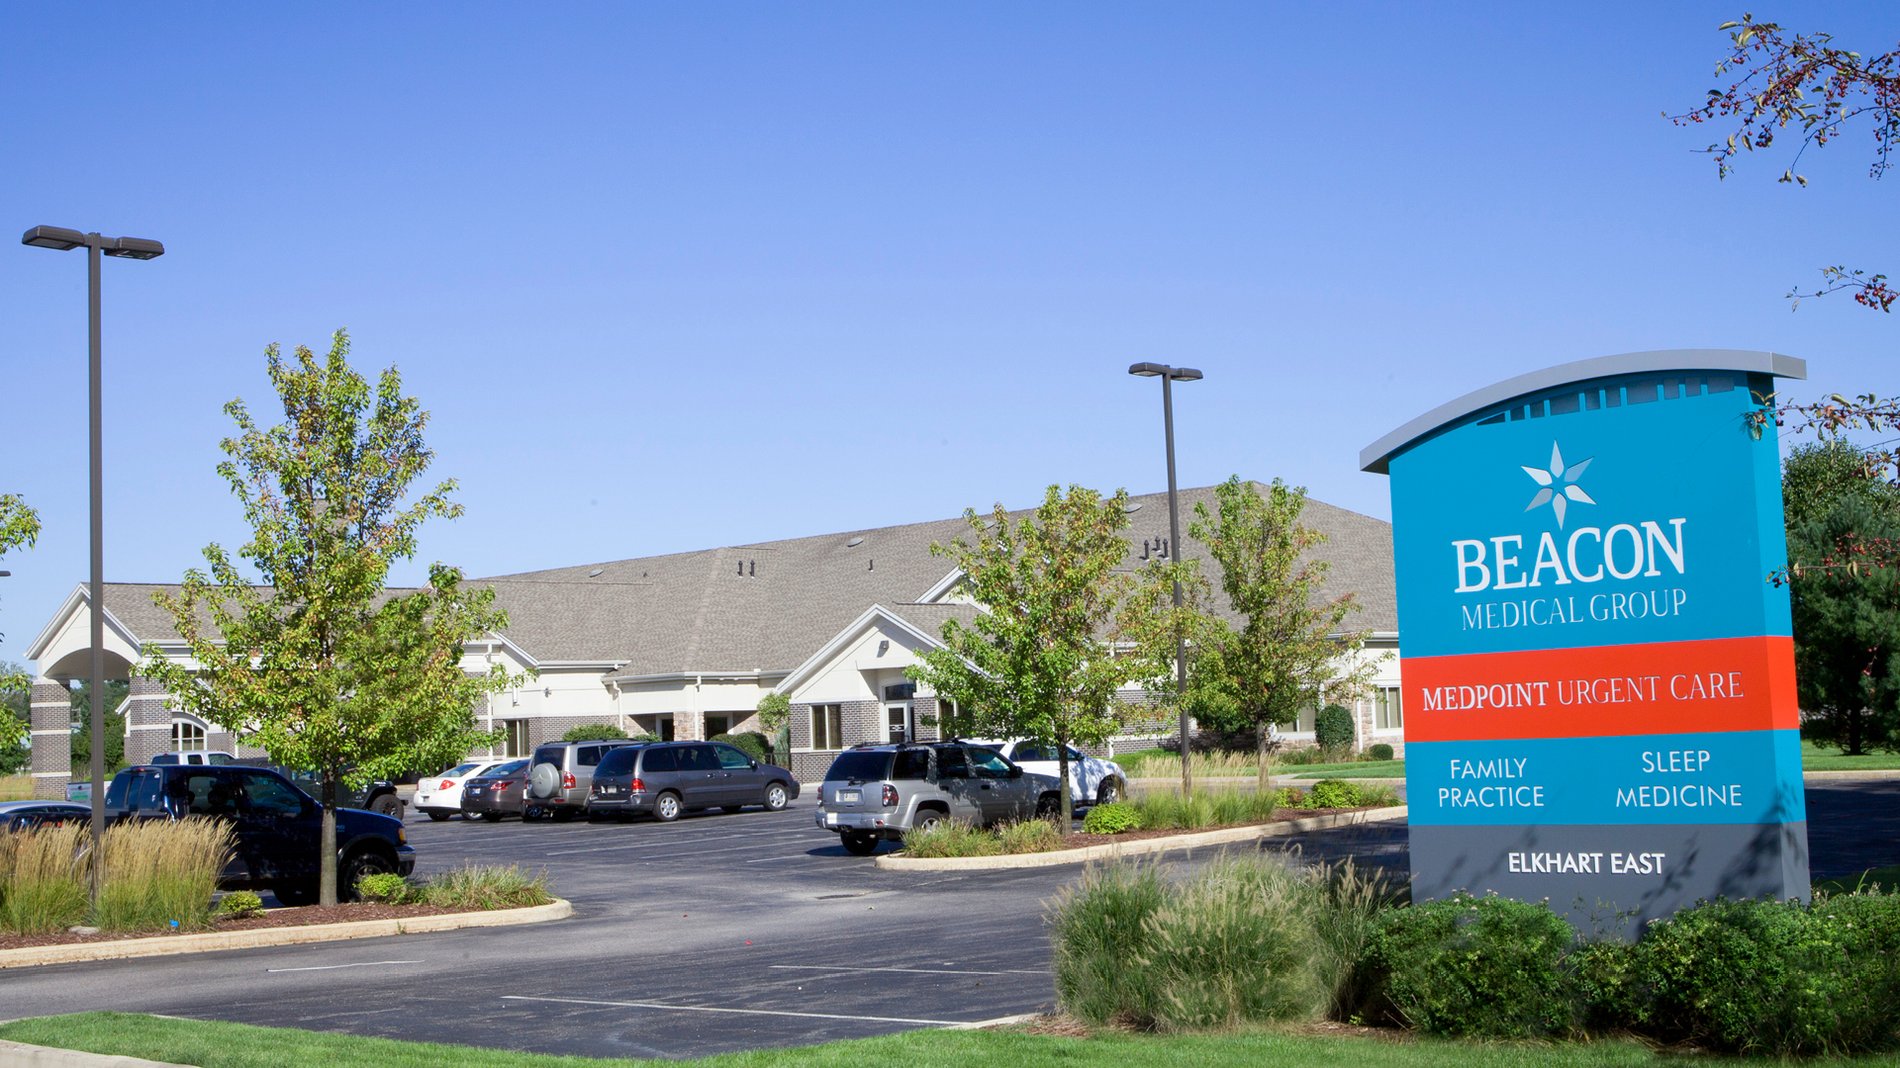 A teal sign stands in front of the parking lot for Beacon Medical Group Elkhart East